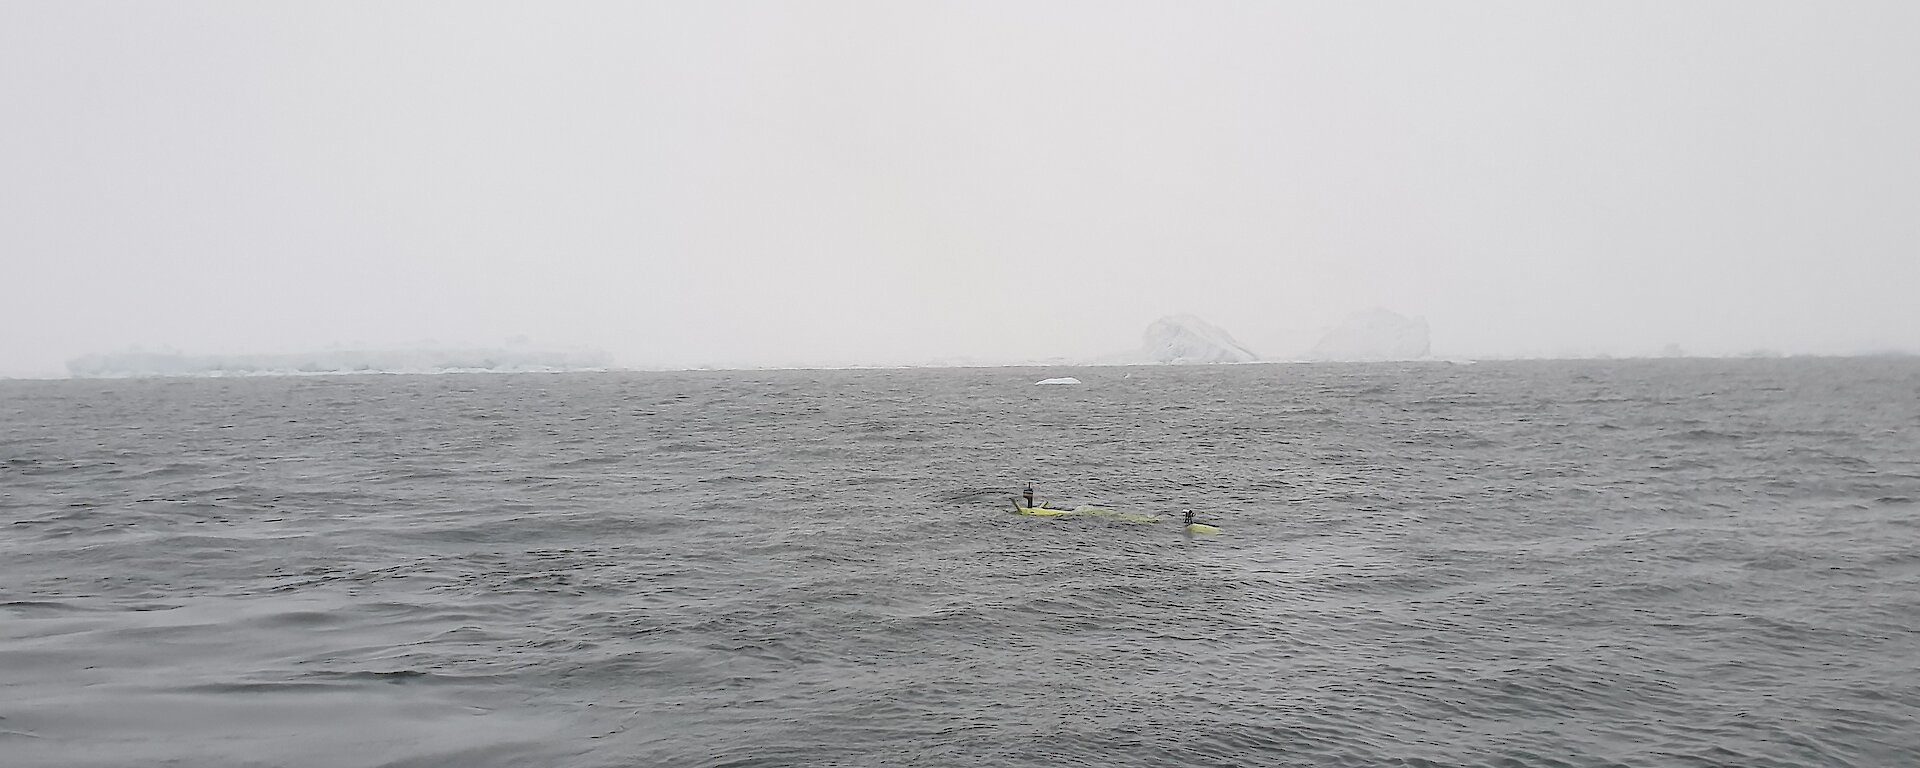 The AUV in a misty grey ocean with the Thwaites Glacier on the horizon.